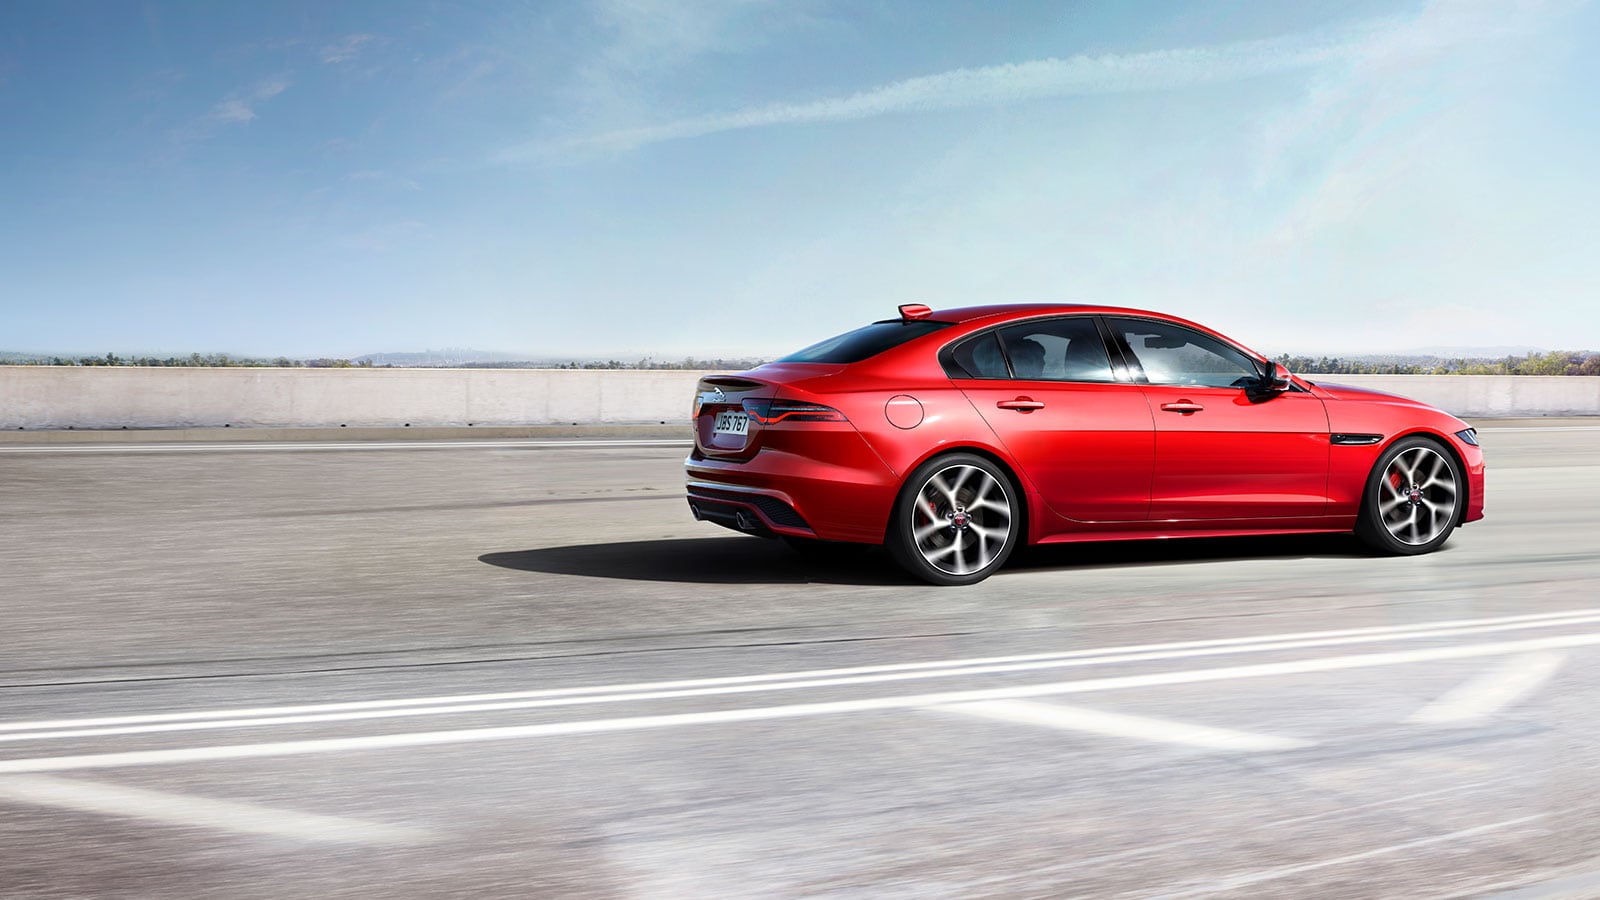 2020 Jaguar Xe Launched In India Starting Price Rs 45